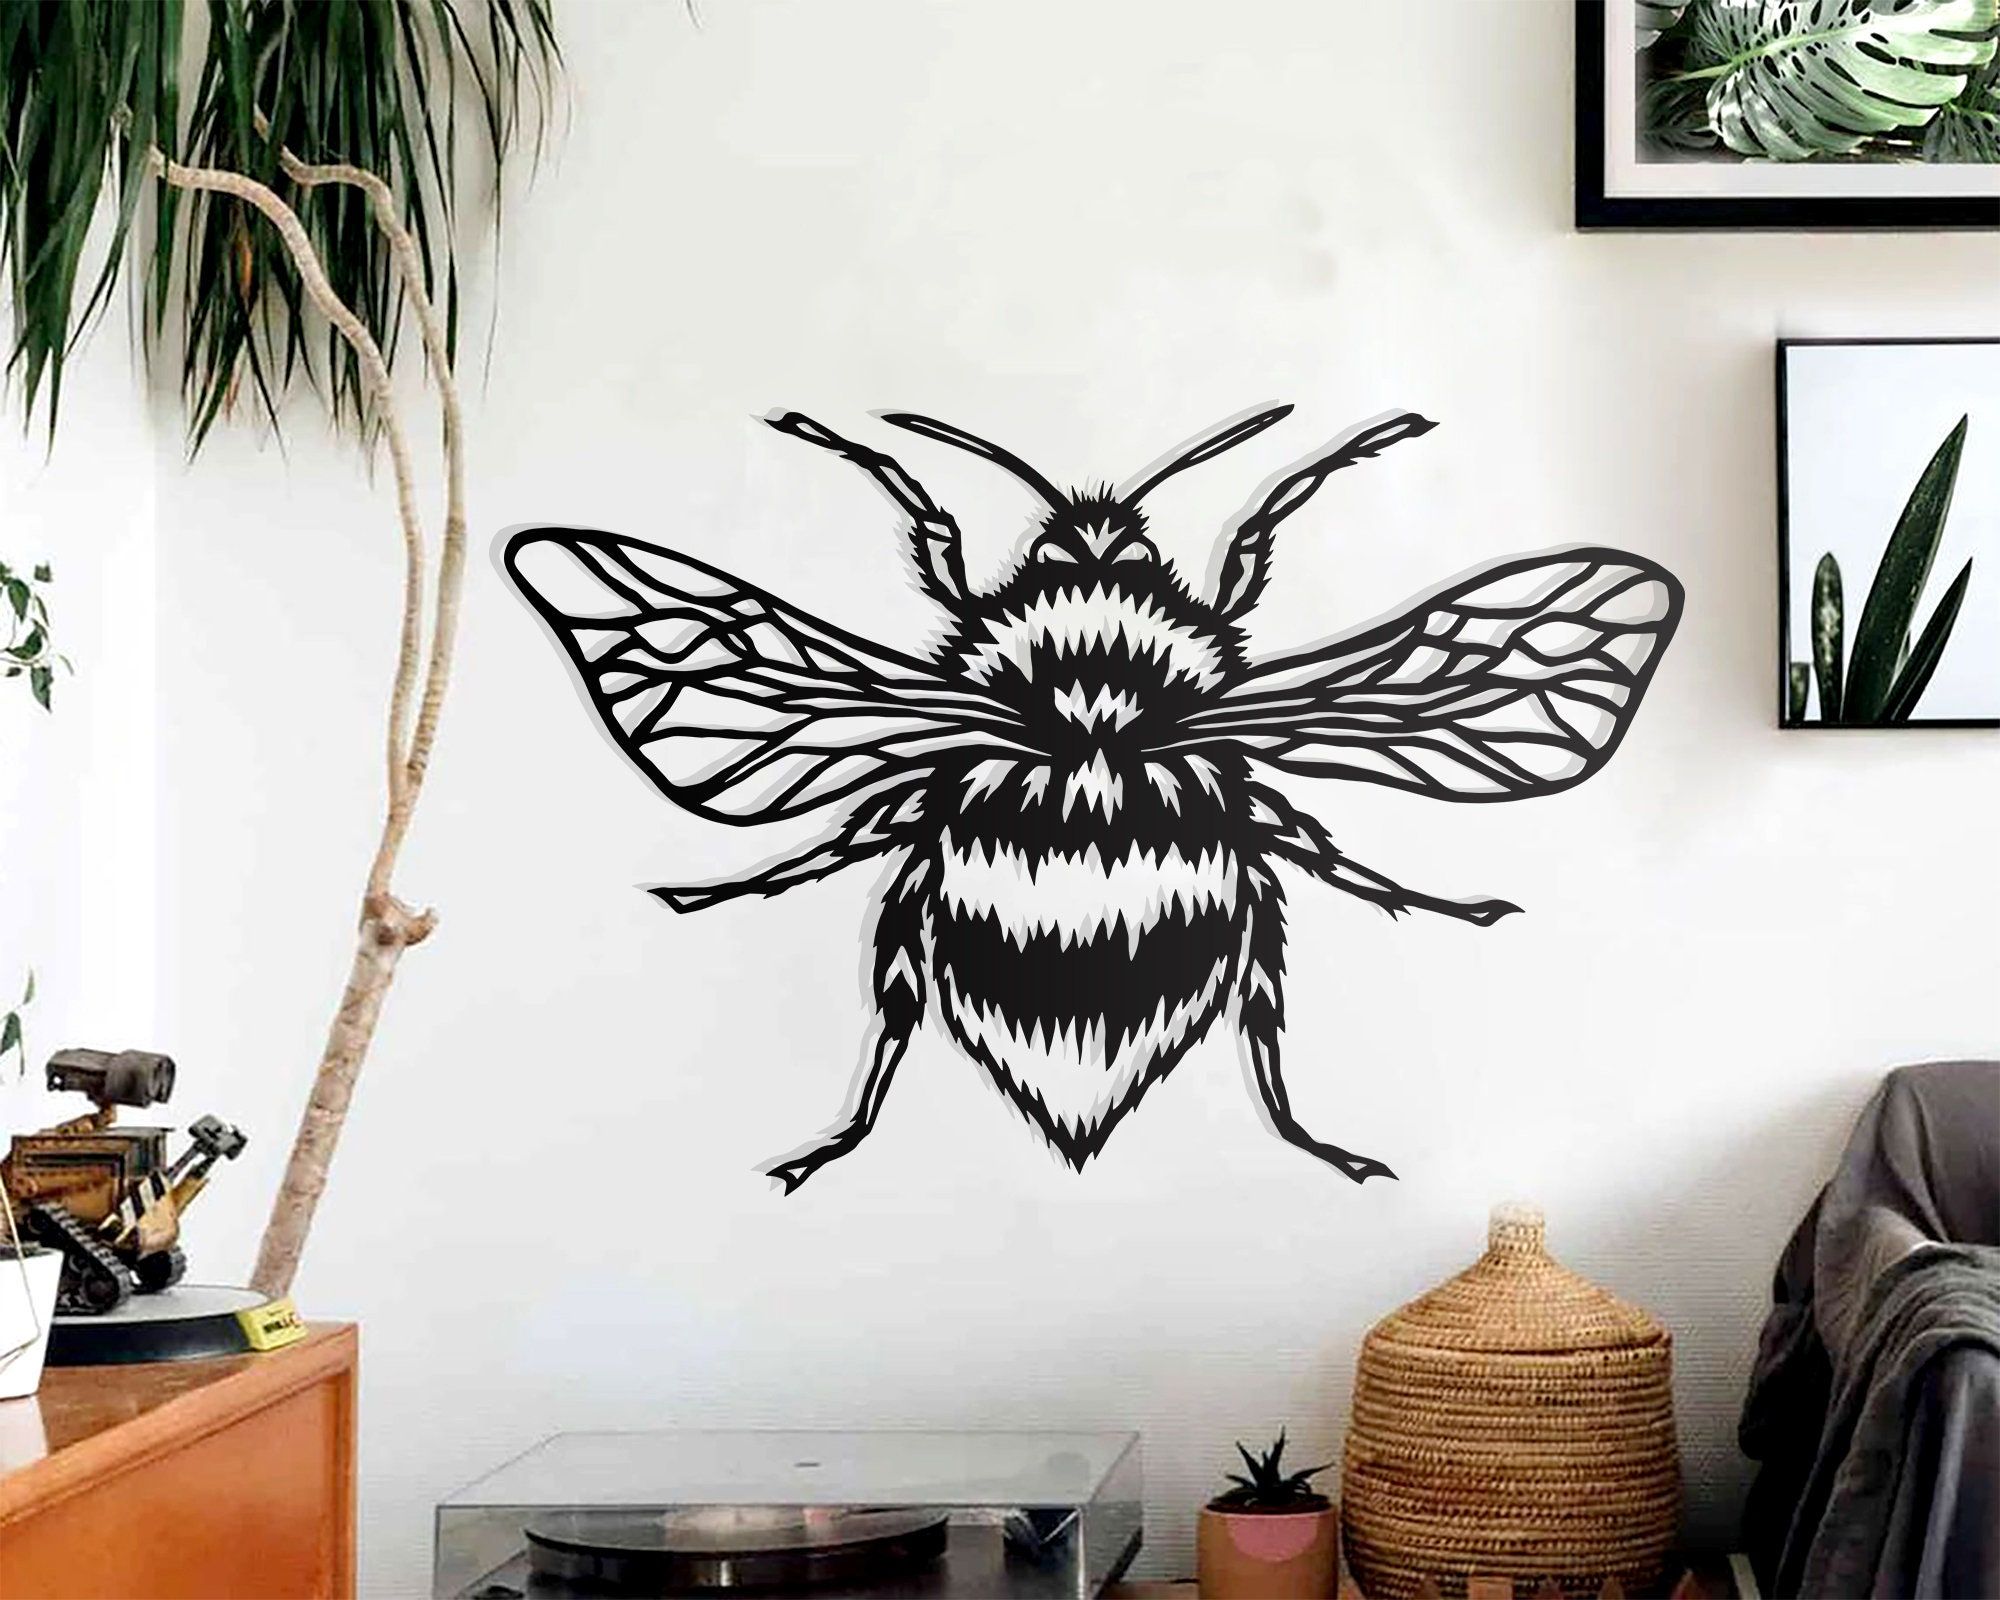 Bumble Bee Metal Wall Art Wall Decoration Living Room – Etsy Within Metal Wall Bumble Bee Wall Art (View 2 of 15)